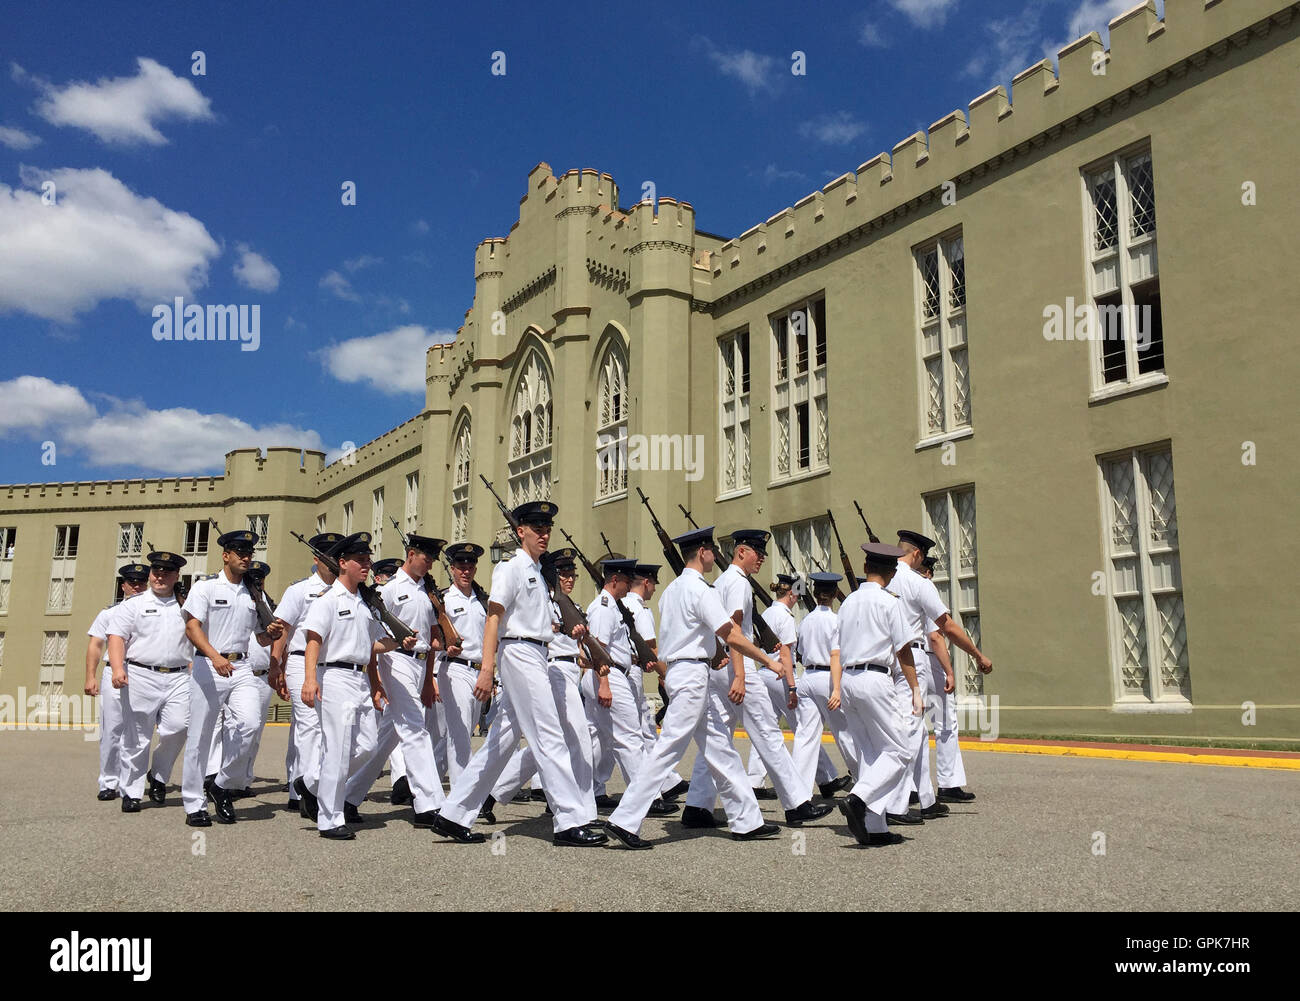 Lexington, USA. 3rd Sep, 2016. Cadets attend a training session at Virginia Military Institute (VMI) in Lexington, the United States, Sept. 3, 2016. VMI is a state-supported military college, one of the oldest institutions of the kind in the U.S. With lots of alumni including George Marshall, VMI has been called the 'West Point of the South'. © Yin Bogu/Xinhua/Alamy Live News Stock Photo